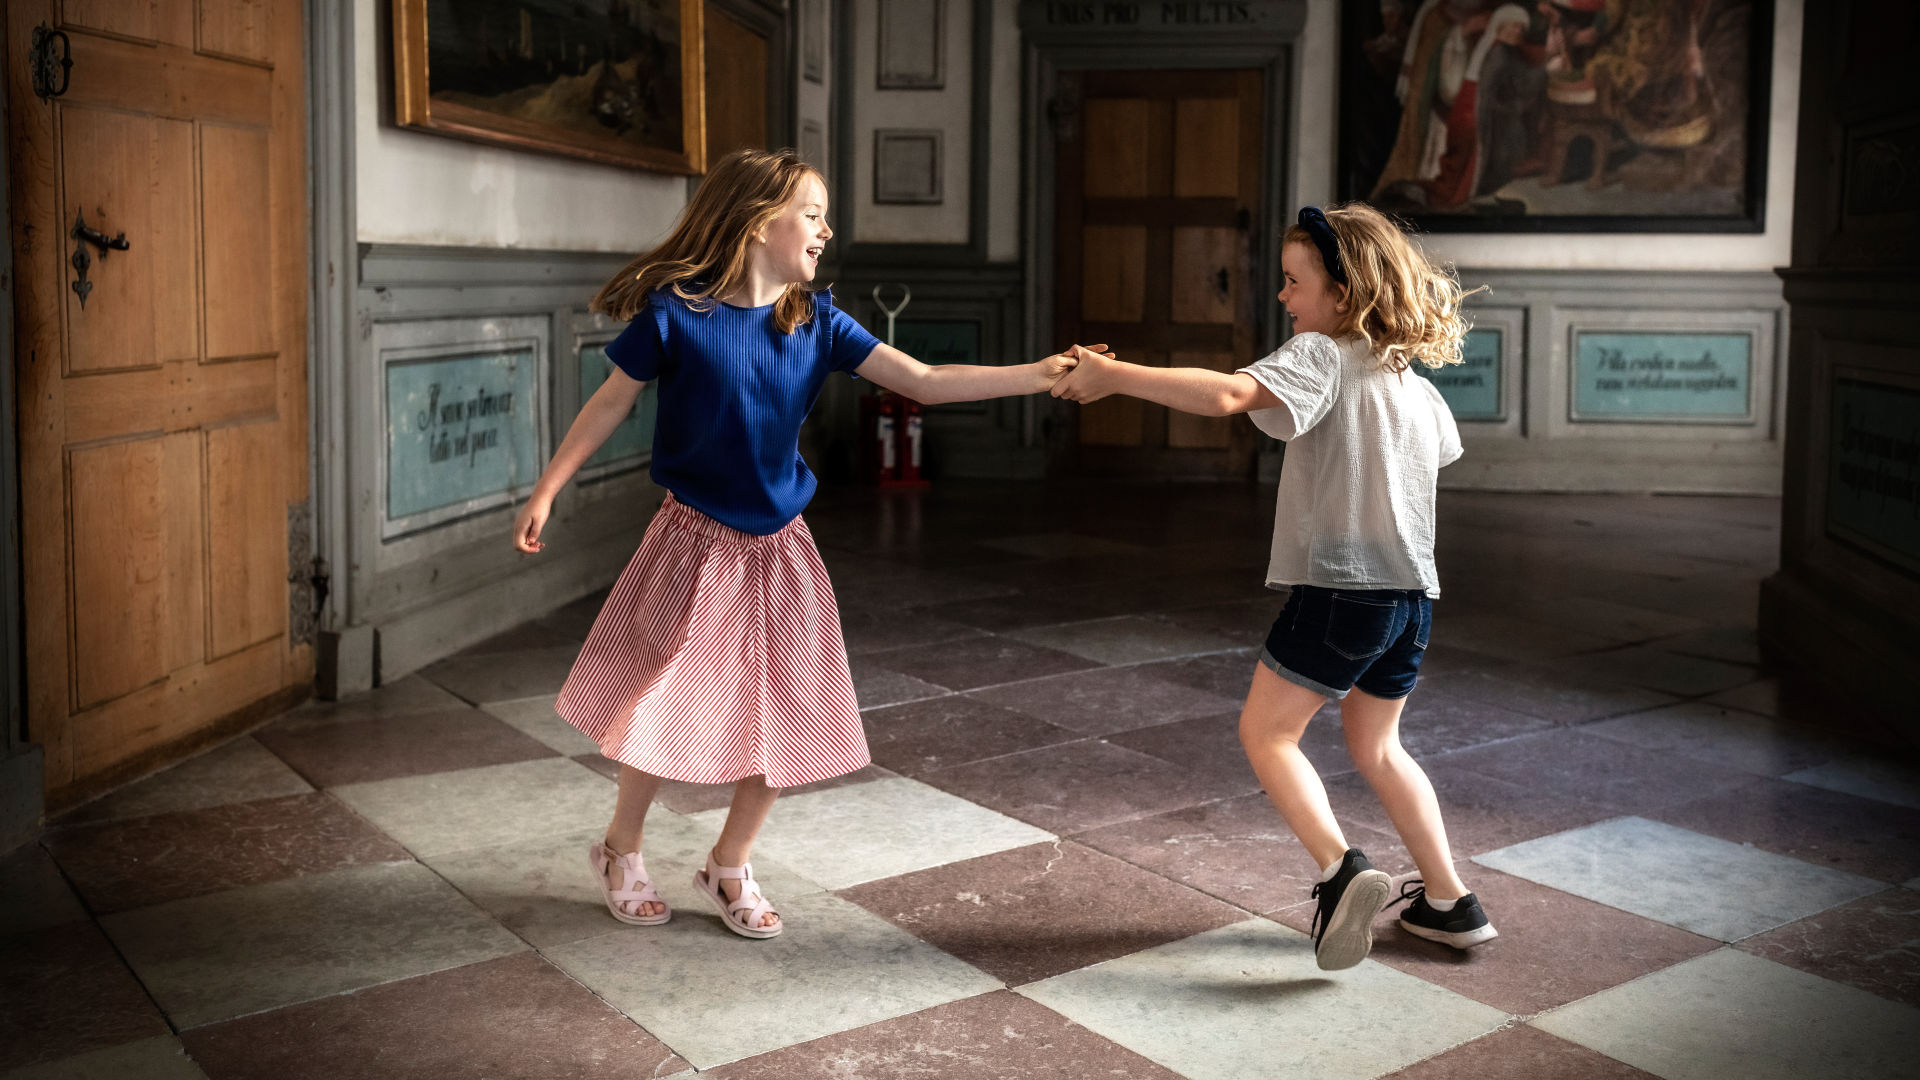 Two children dancing in one of the corridors of the castle.